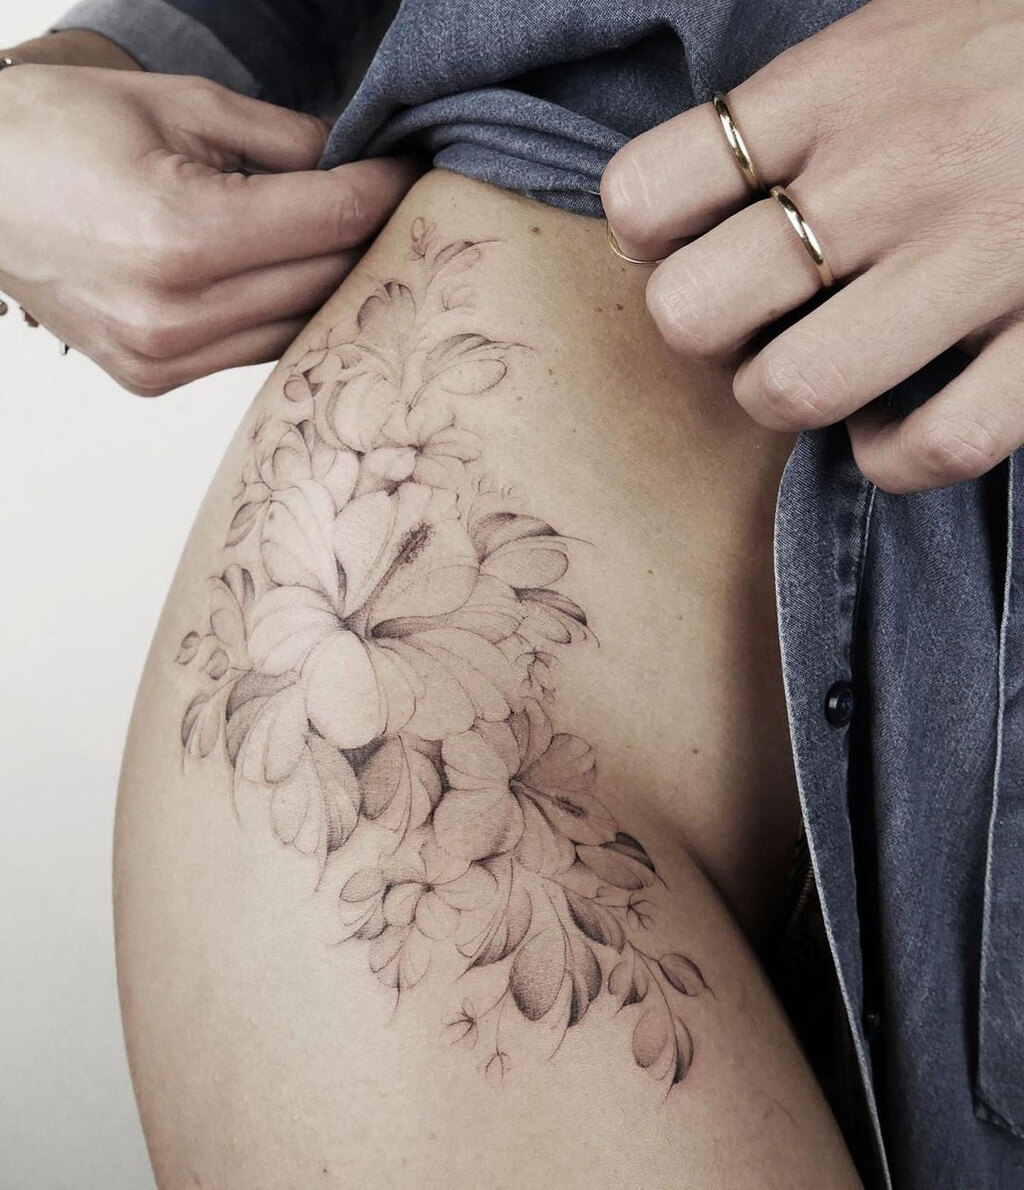 A woman with a flower tattoo on her thigh
